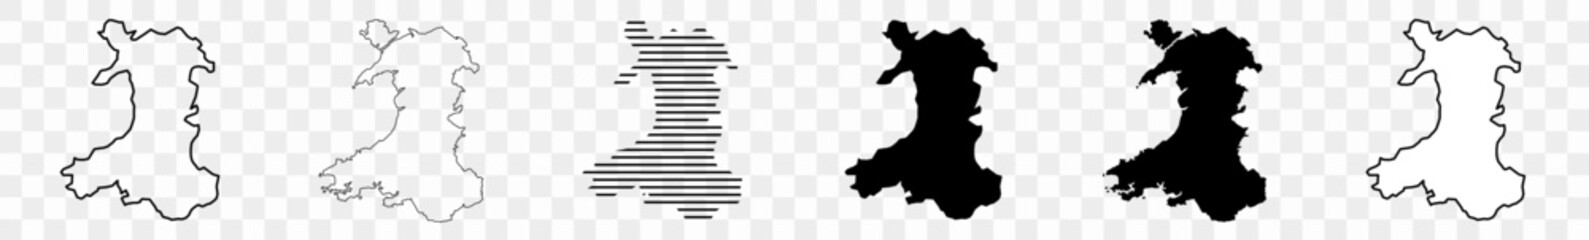 Wales Map Black | Welsh Border | State Country | Transparent Isolated | Variations